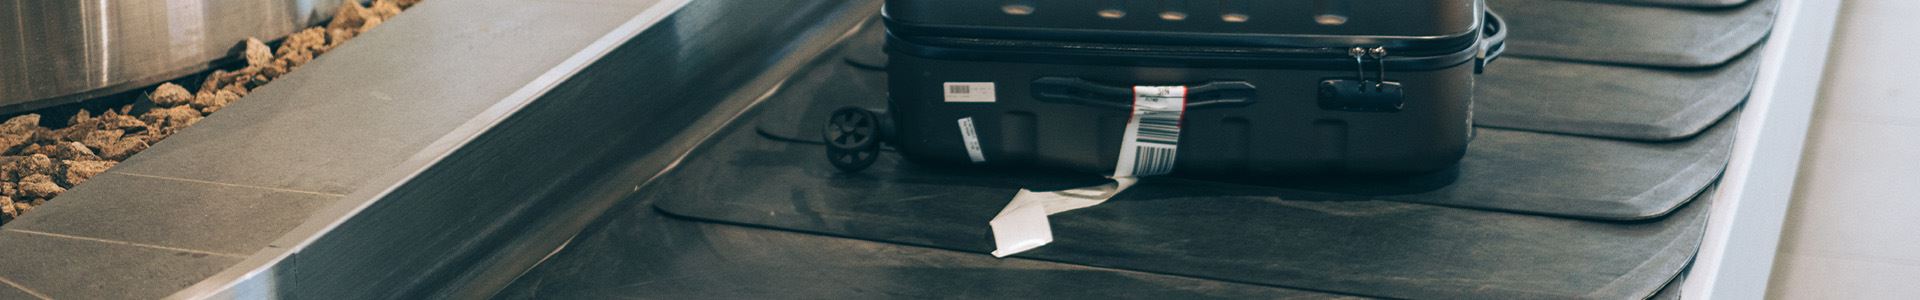 Picture consisting of a black hard case carry-on bag with top and side handles, and with a white baggage tag on the side handle, resting on an airport baggage carousel.